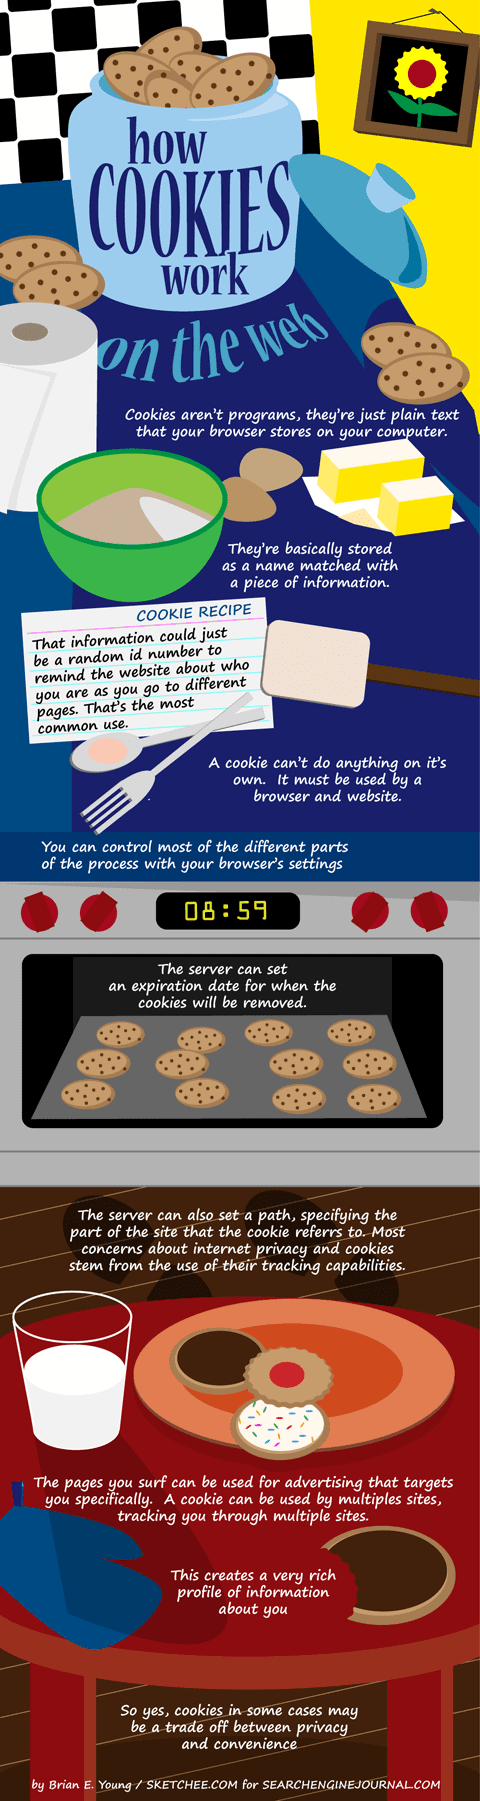 How Cookies Work on the Web Infographic